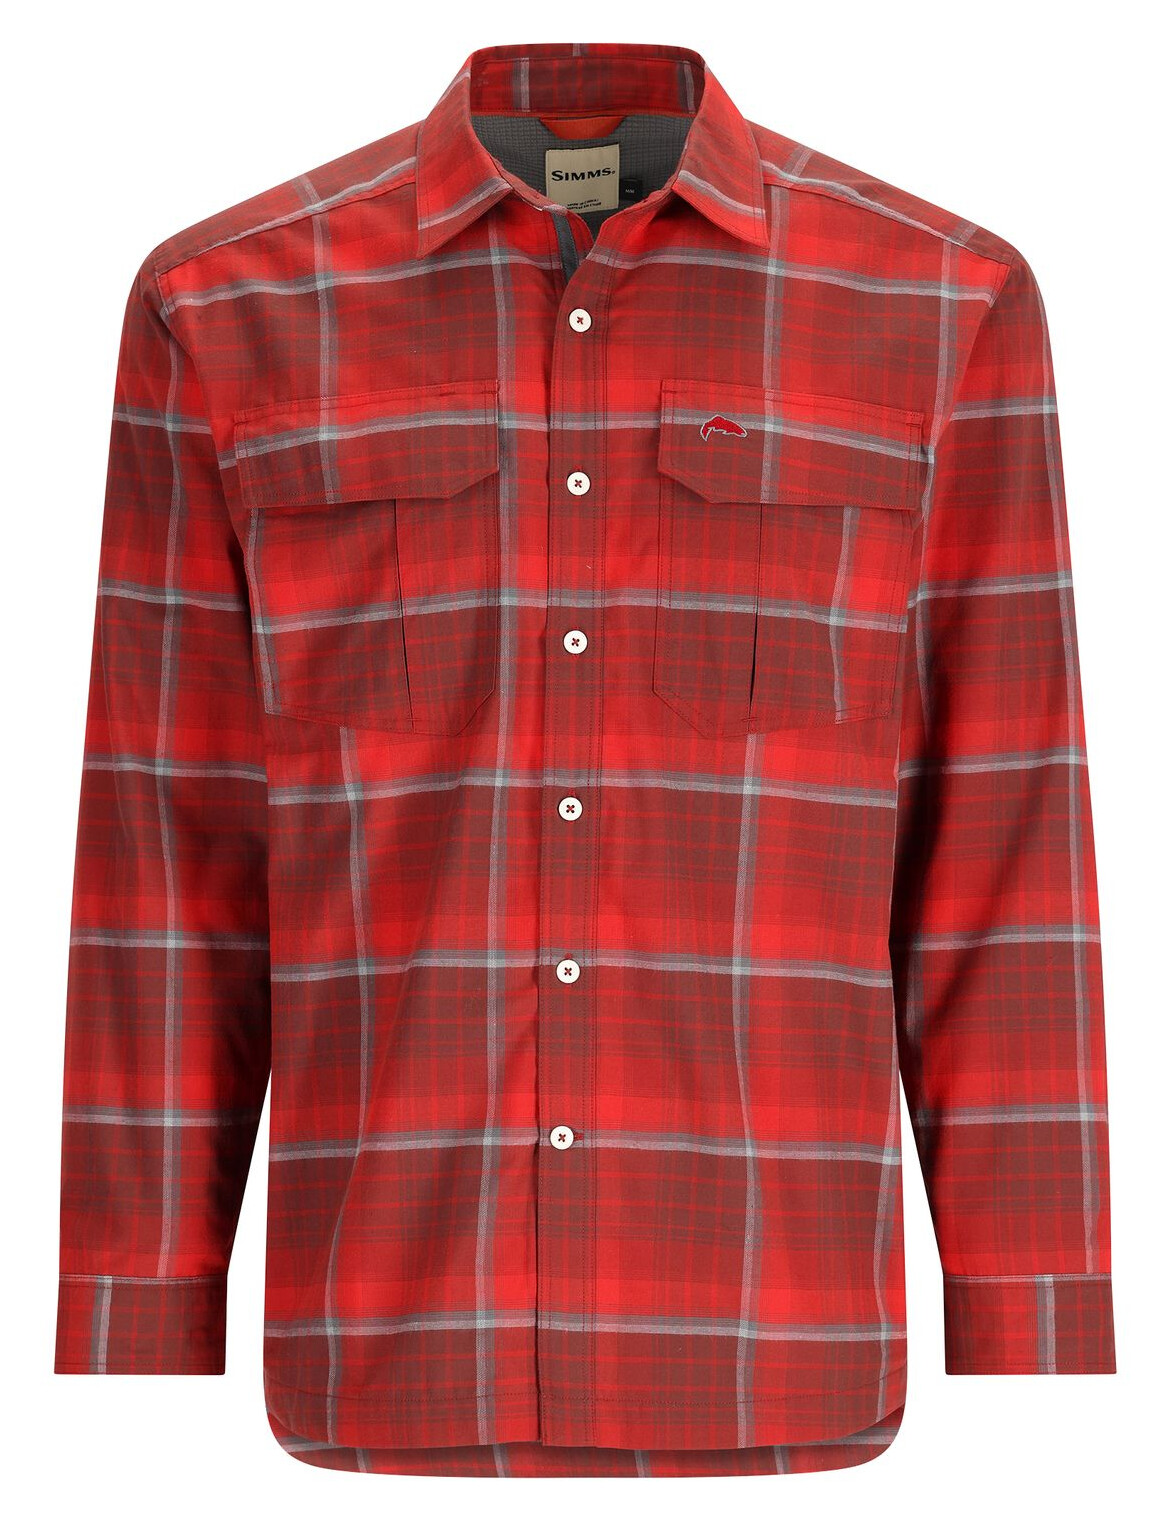 Fishing Shirt Simms Coldweather Cutty Red Asym Ombre Plaid